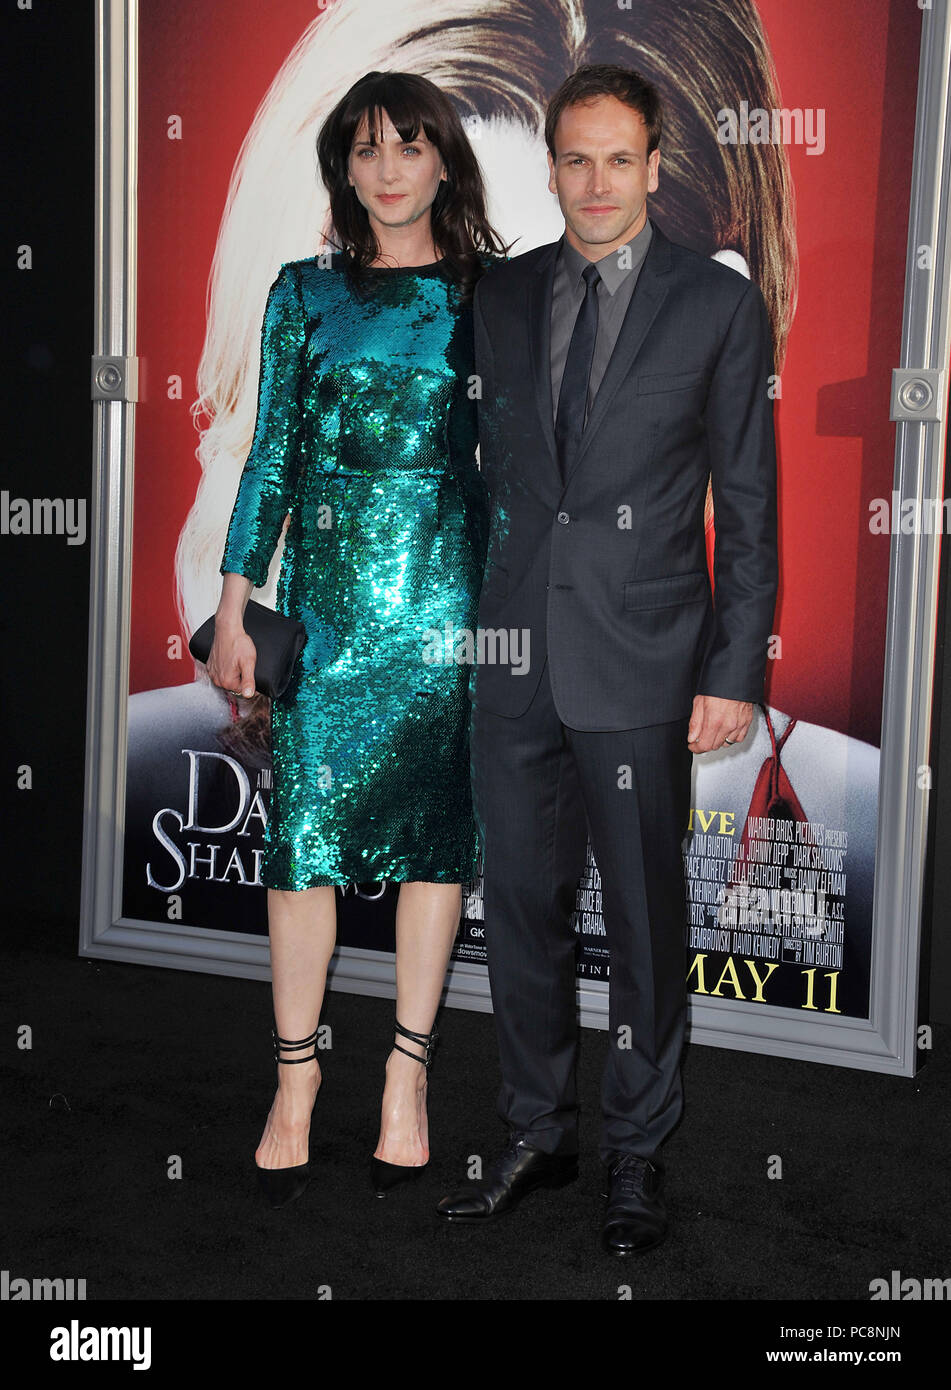 Jonny Lee Miller and wife Michele Hicks  at the Dark Shadows Premiere at the Chinese Theatre In Los Angeles.Jonny Lee Miller and wife Michele Hicks _211 ------------- Red Carpet Event, Vertical, USA, Film Industry, Celebrities,  Photography, Bestof, Arts Culture and Entertainment, Topix Celebrities fashion /  Vertical, Best of, Event in Hollywood Life - California,  Red Carpet and backstage, USA, Film Industry, Celebrities,  movie celebrities, TV celebrities, Music celebrities, Photography, Bestof, Arts Culture and Entertainment,  Topix, vertical,  family from from the year , 2012, inquiry tsu Stock Photo